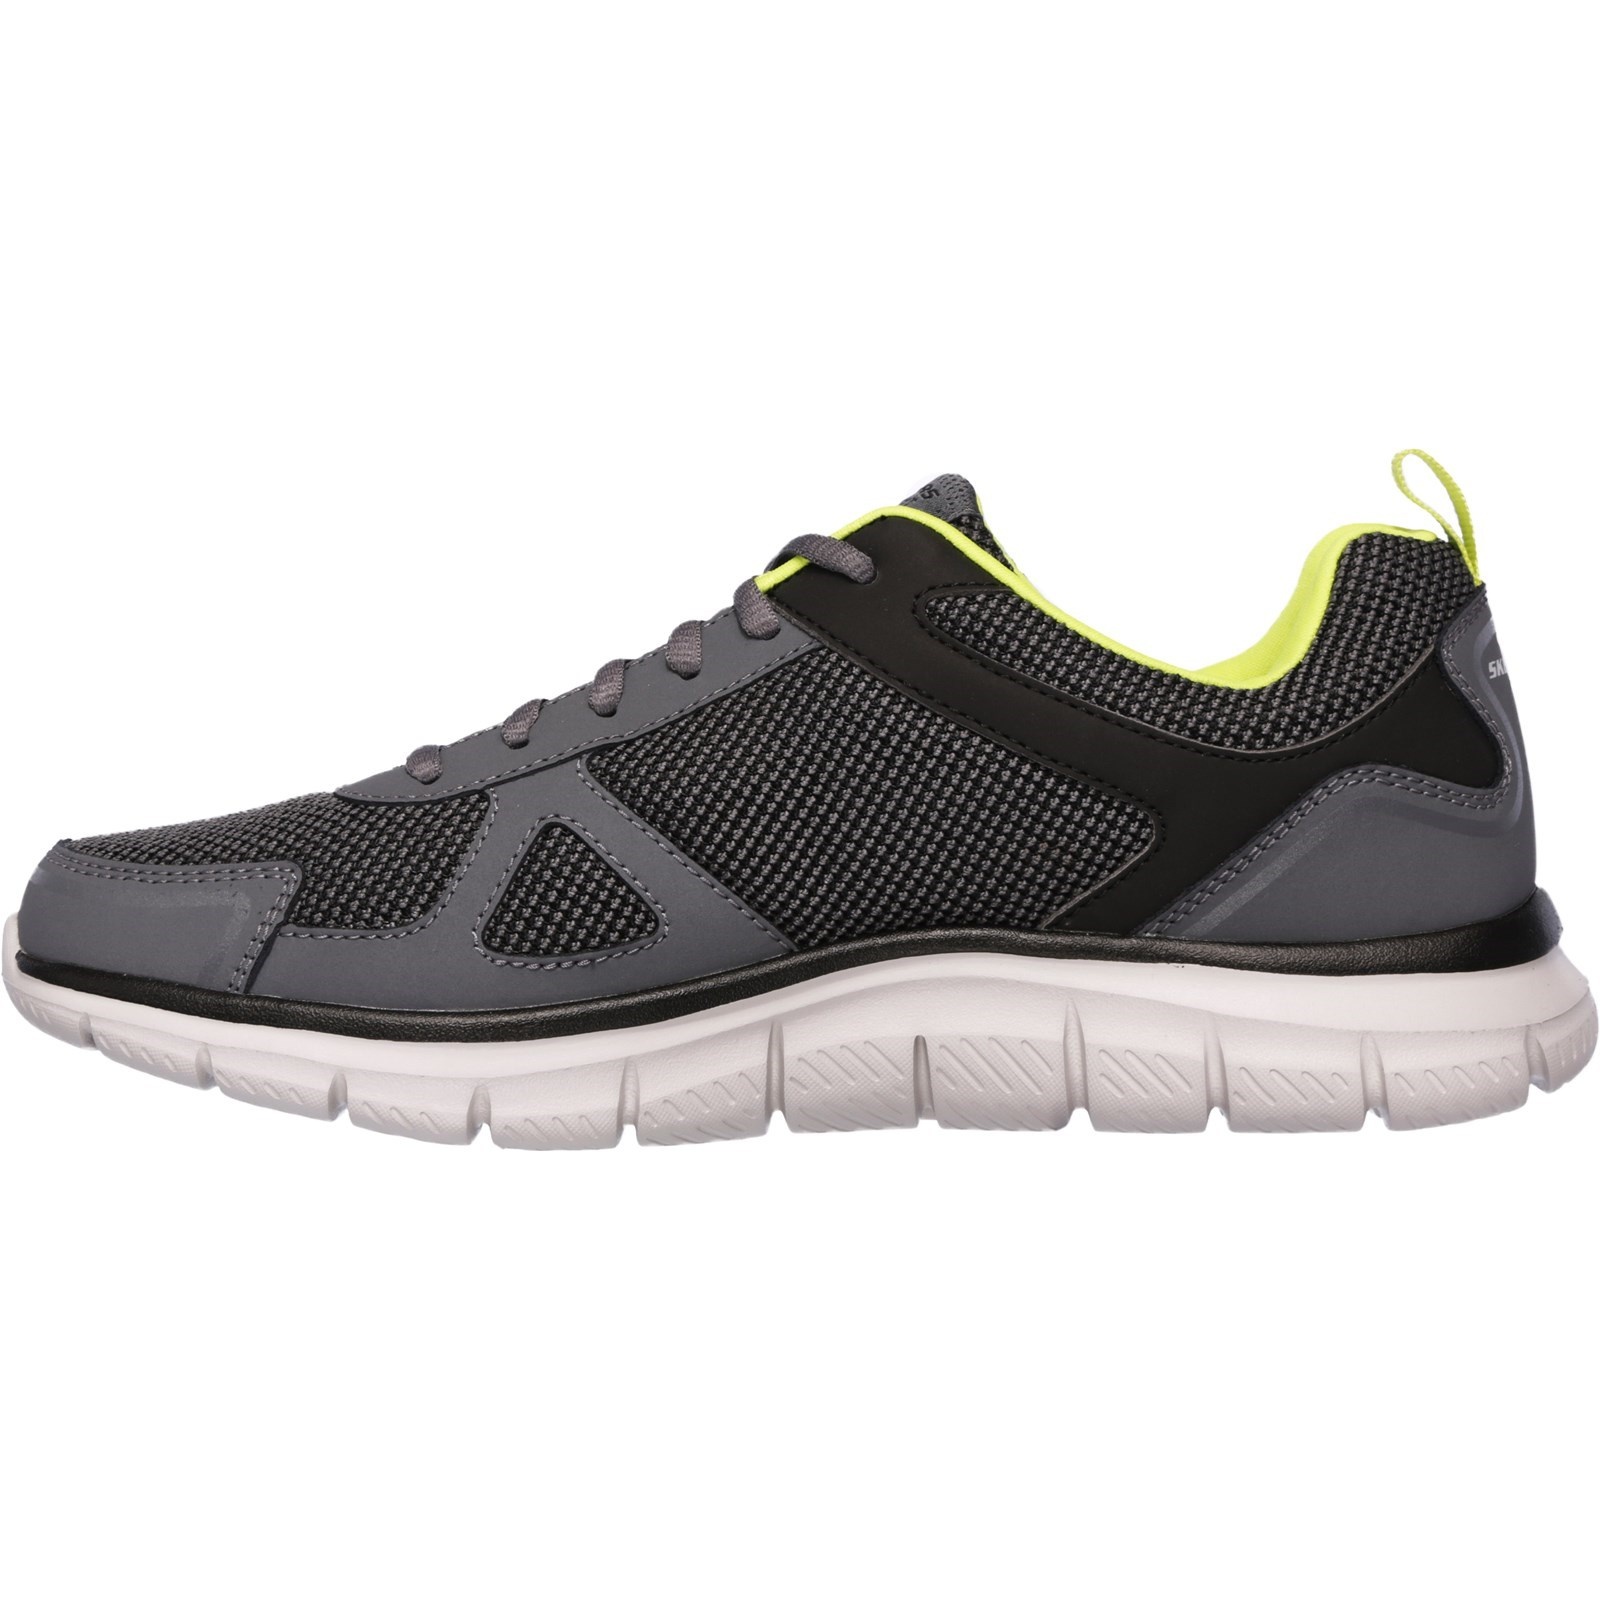 Skechers Track Bucolo Charcoal/Lime